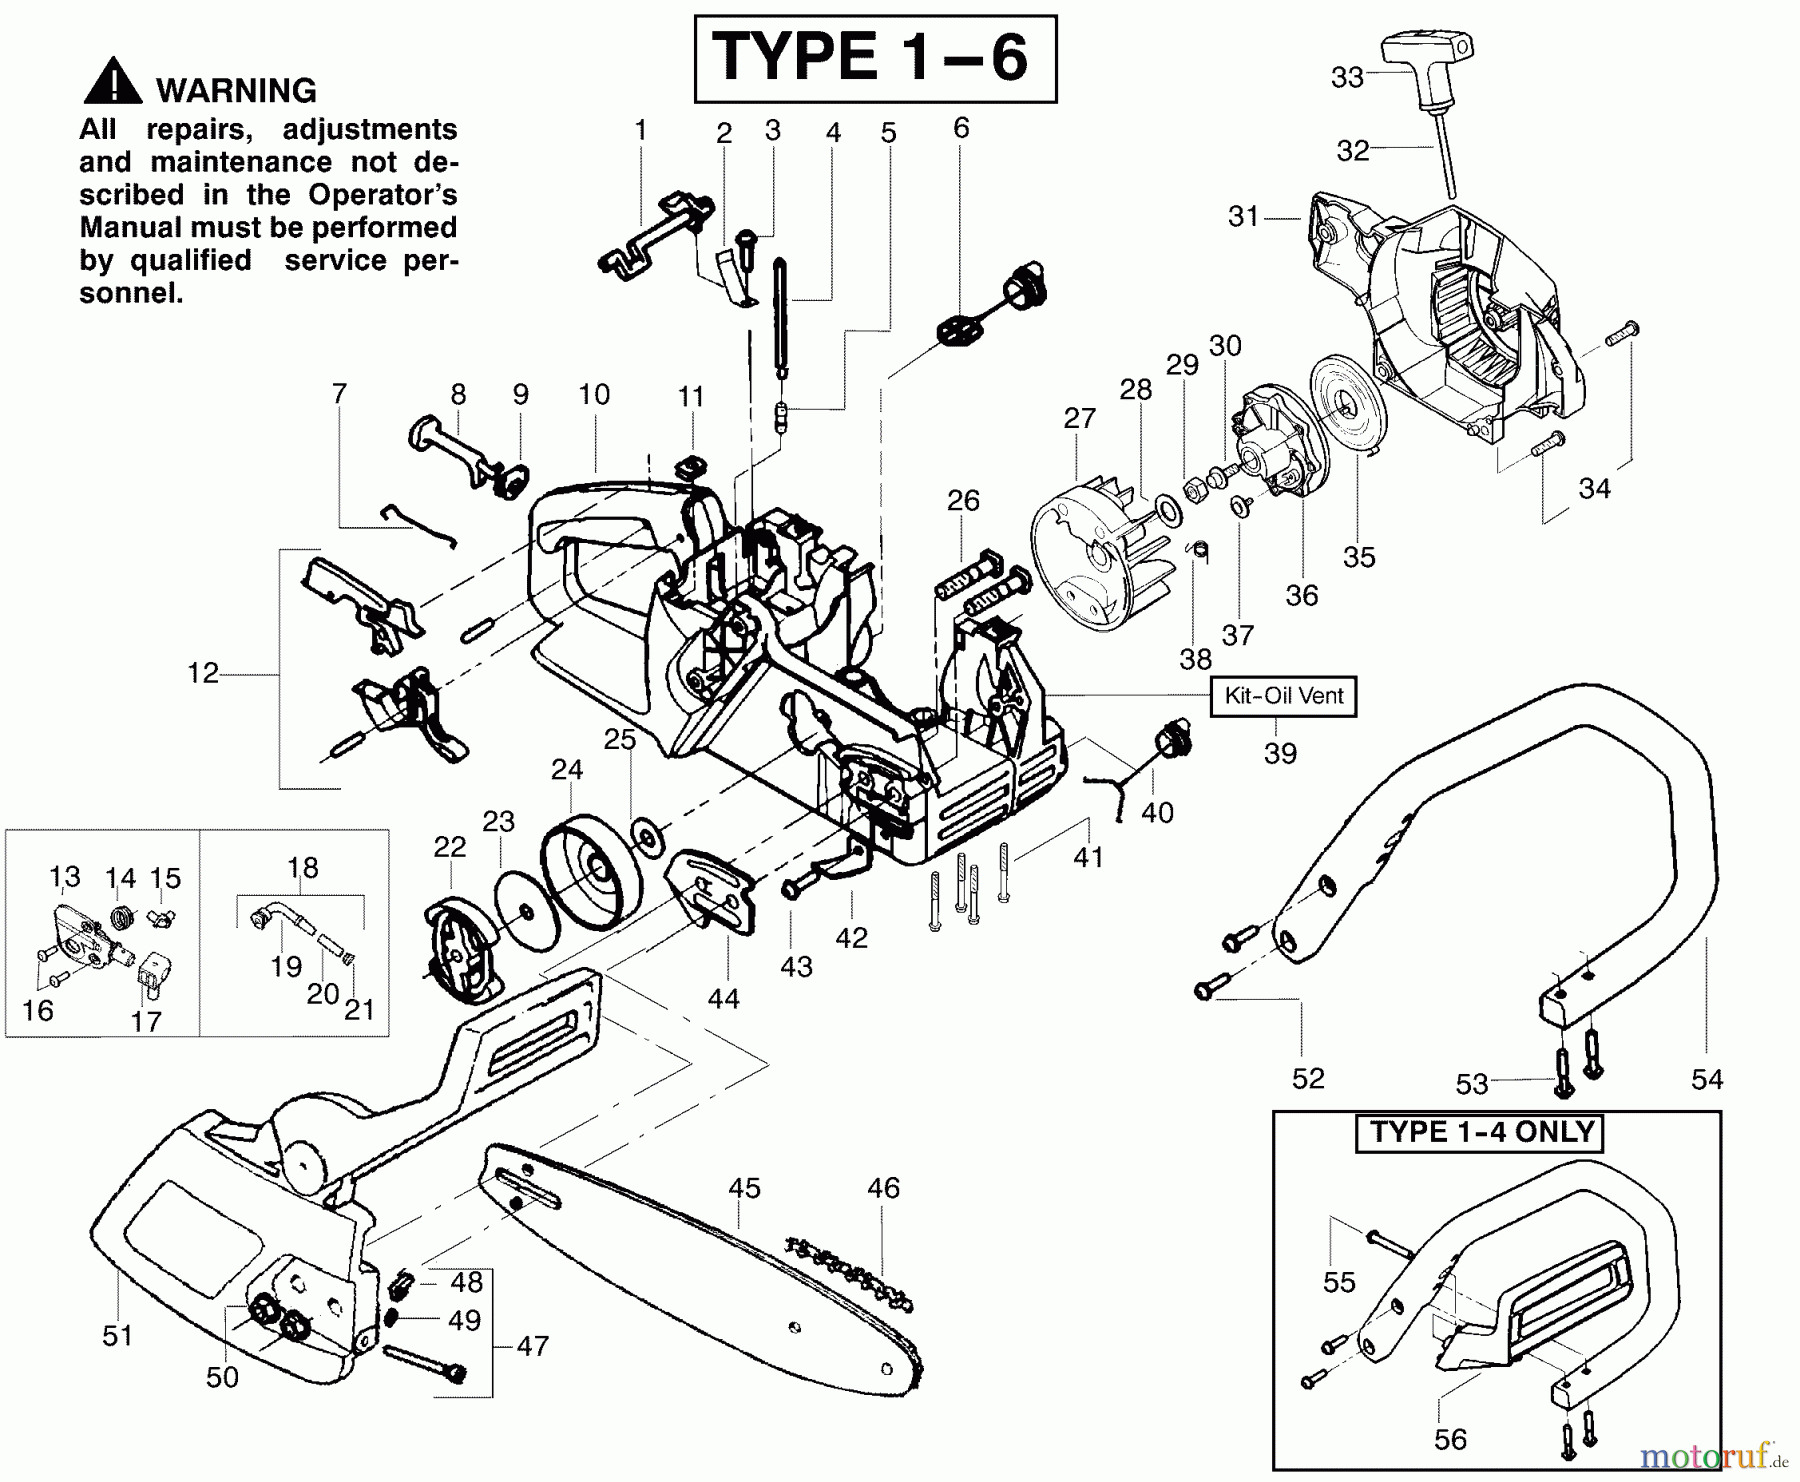  Poulan / Weed Eater Motorsägen 1950 (Type 6) - Poulan Woodshark Chainsaw Chassis & Bar Assembly Type 1-6